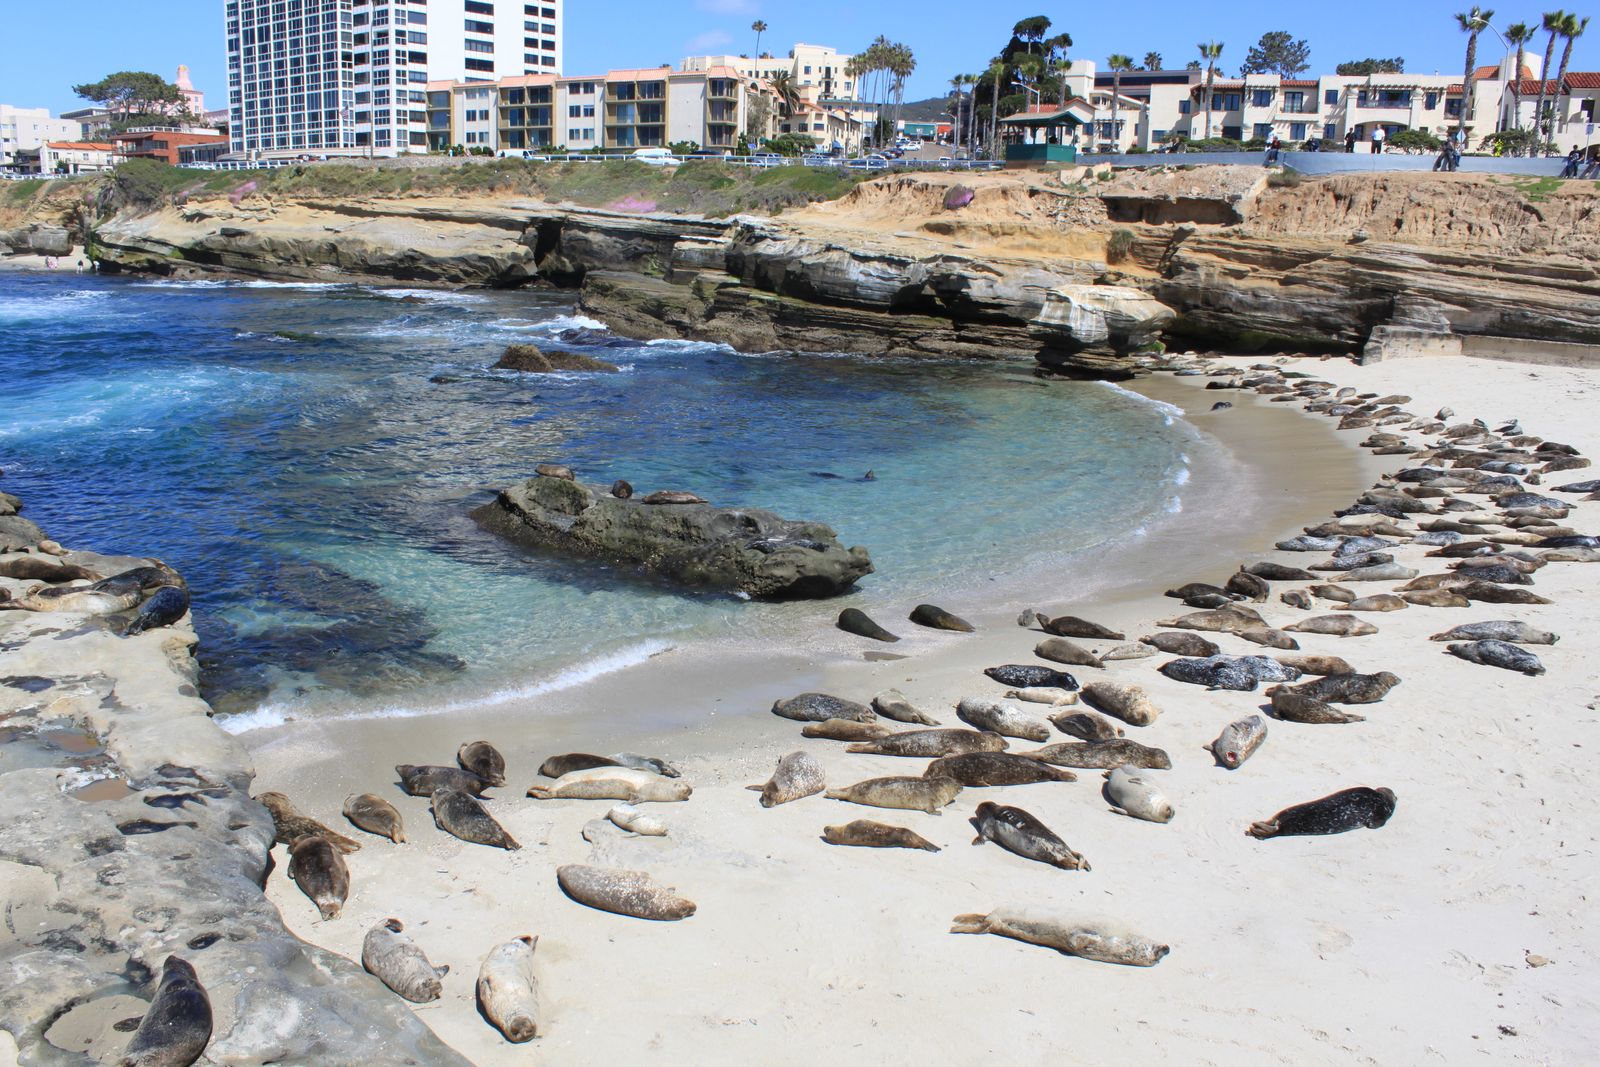 a group of seals on a beach